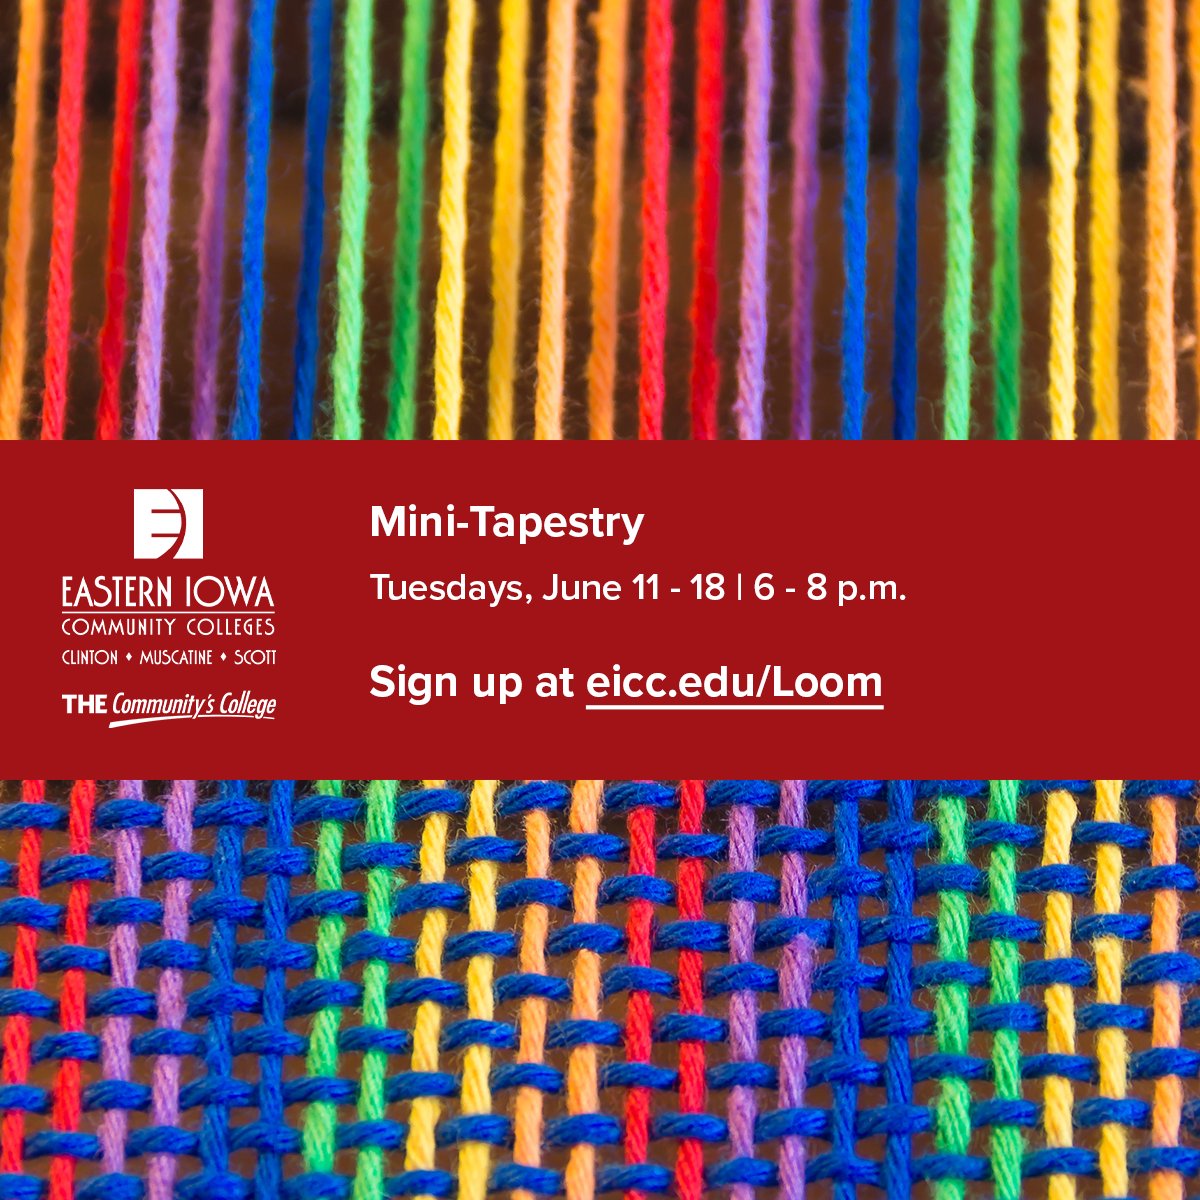 Join us for our Mini-Tapestry class and learn how to warp a frame loom, weave diagonal and vertical blocks, weave a wavy line, and various techniques for finishing your tapestry.

Register now at eicc.edu/Loom. 🧶

#THECommunitysCollege #Tapestry #Art #Crafts #Loom